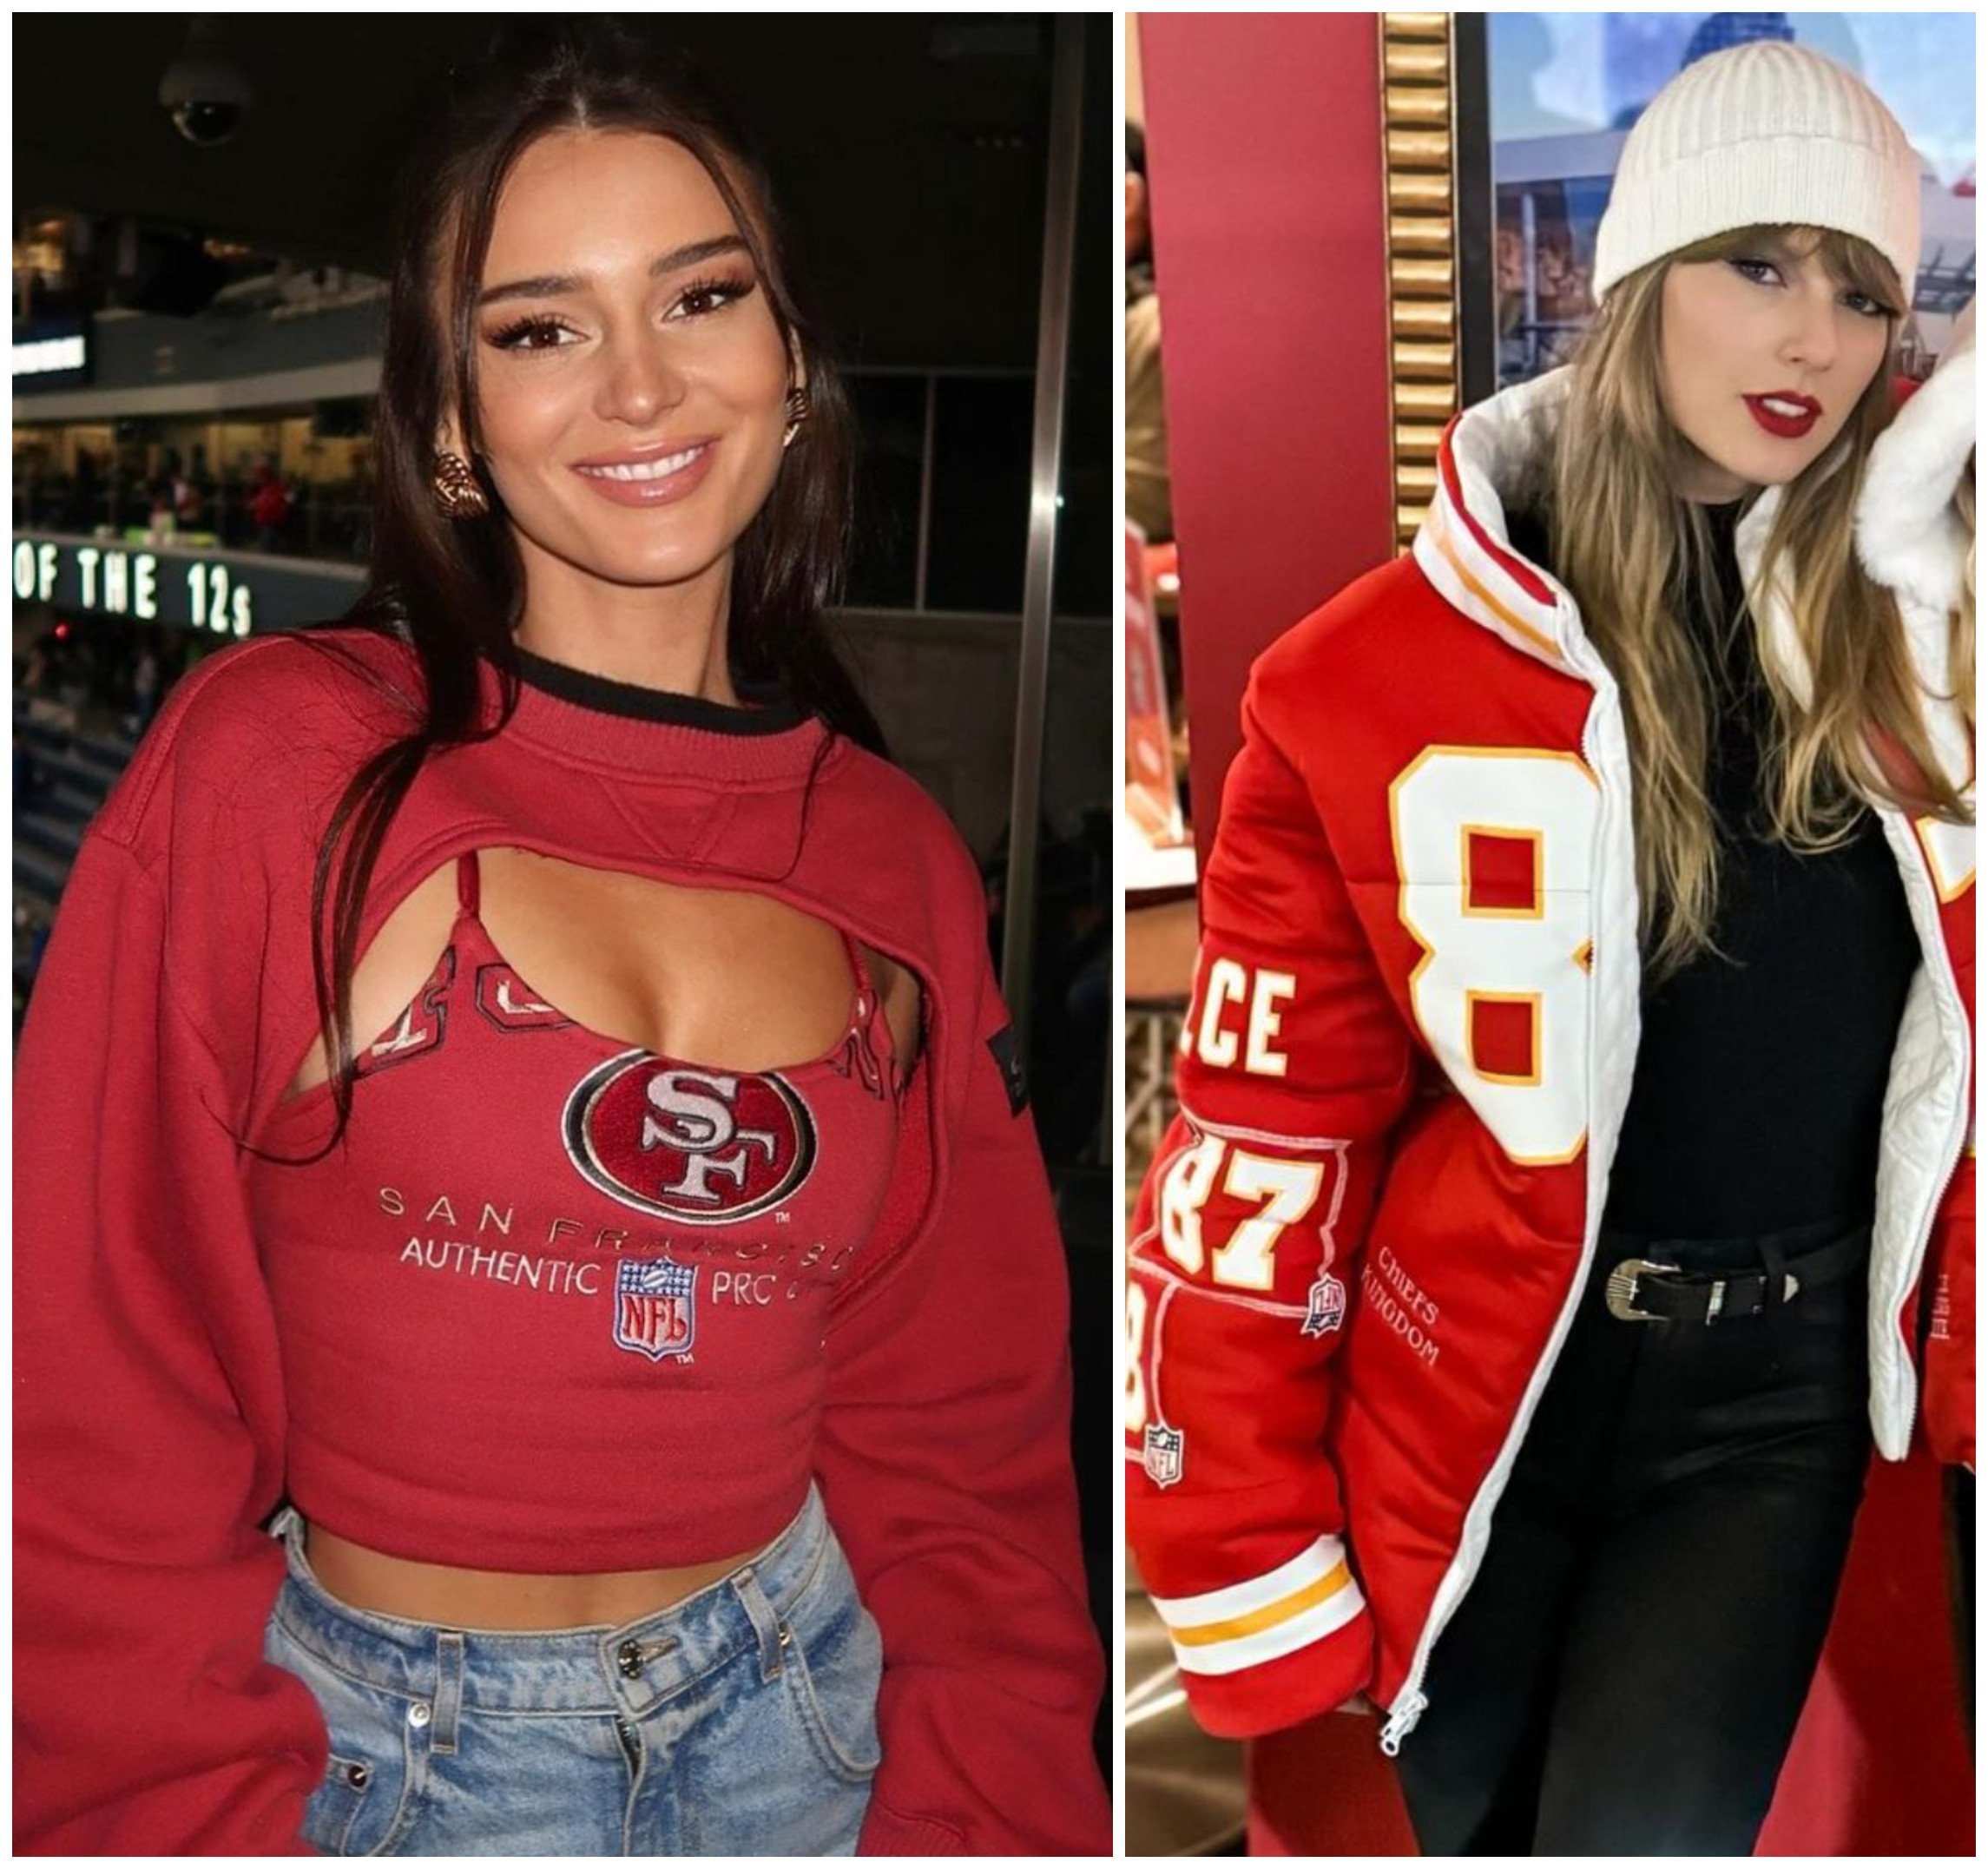 Kristin Juszczyk made a red Kansas City Chiefs jacket for Taylor Swift and now all eyes are on her clothing brand. Photos: @kristinjuszczyk, @brittanylynne/Instagram